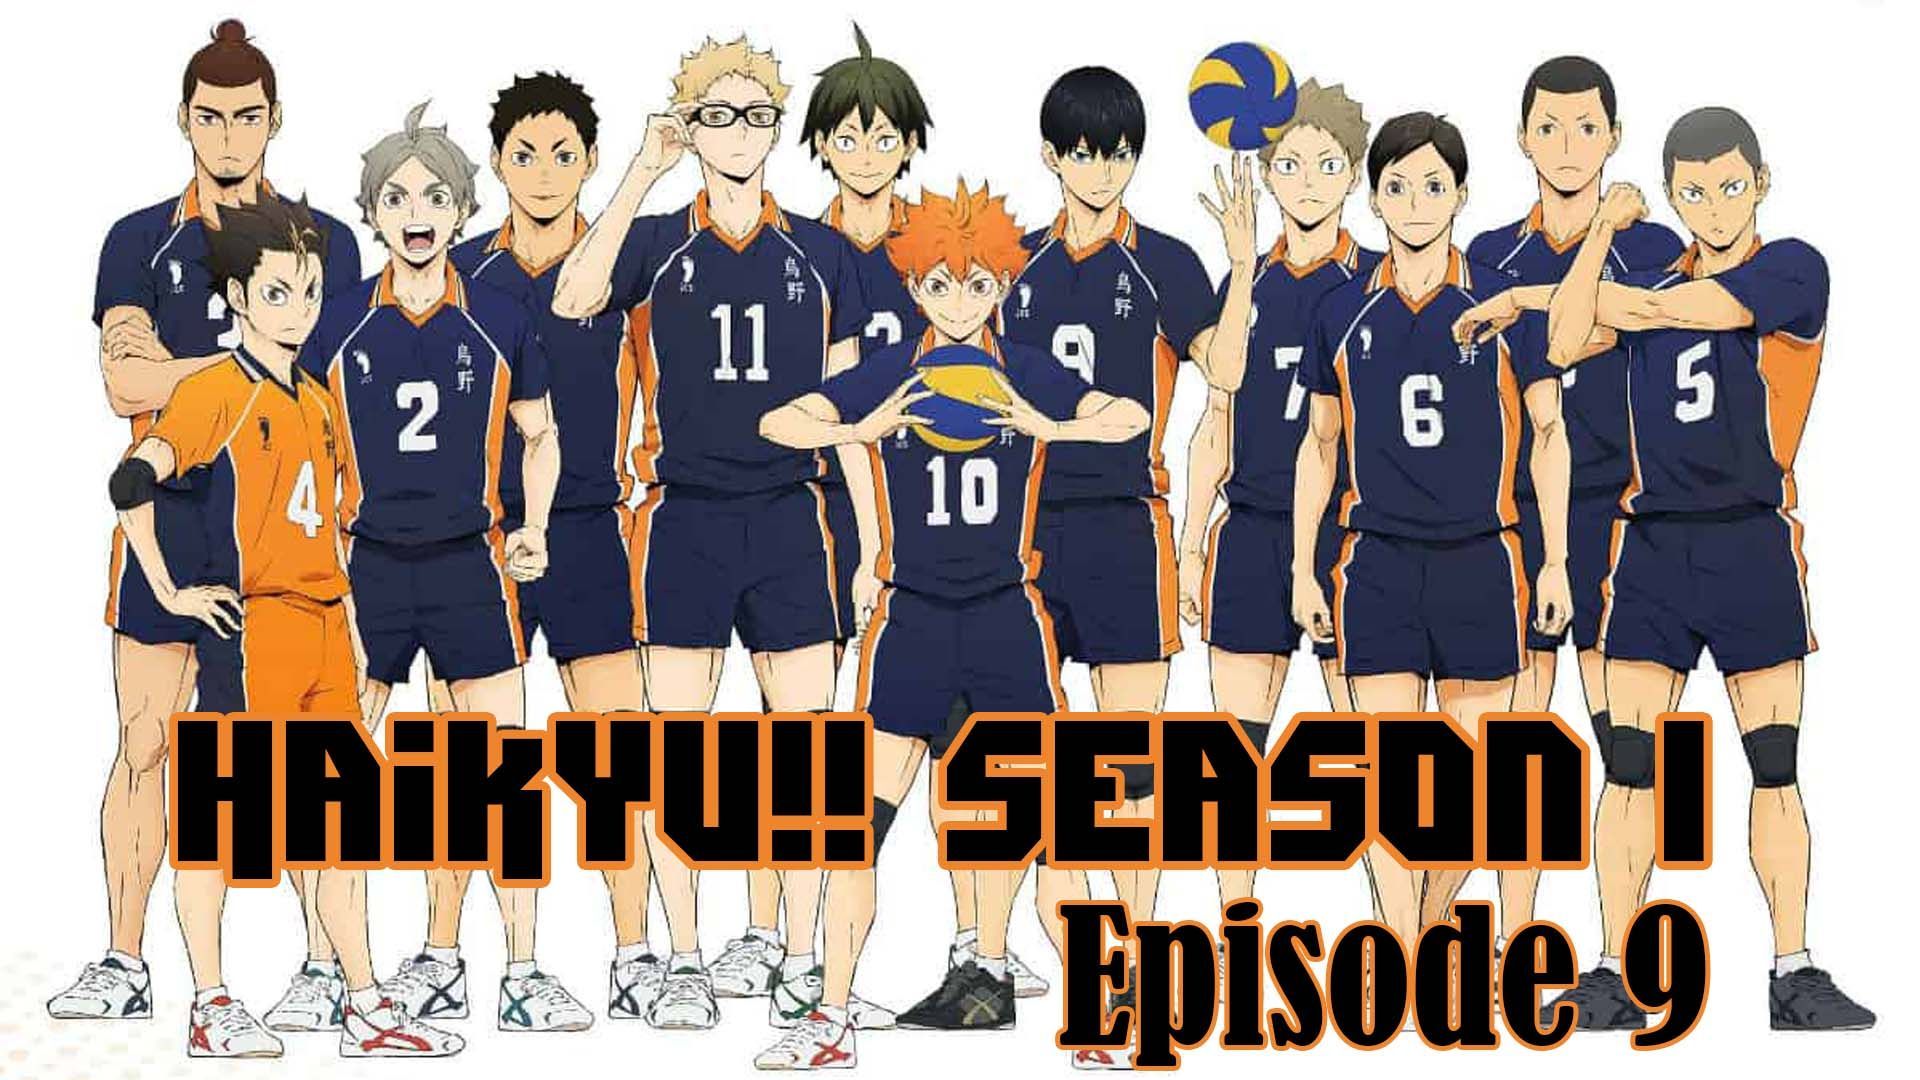 Haikyuu!!: To the Top ep9 - The Manager - I drink and watch anime